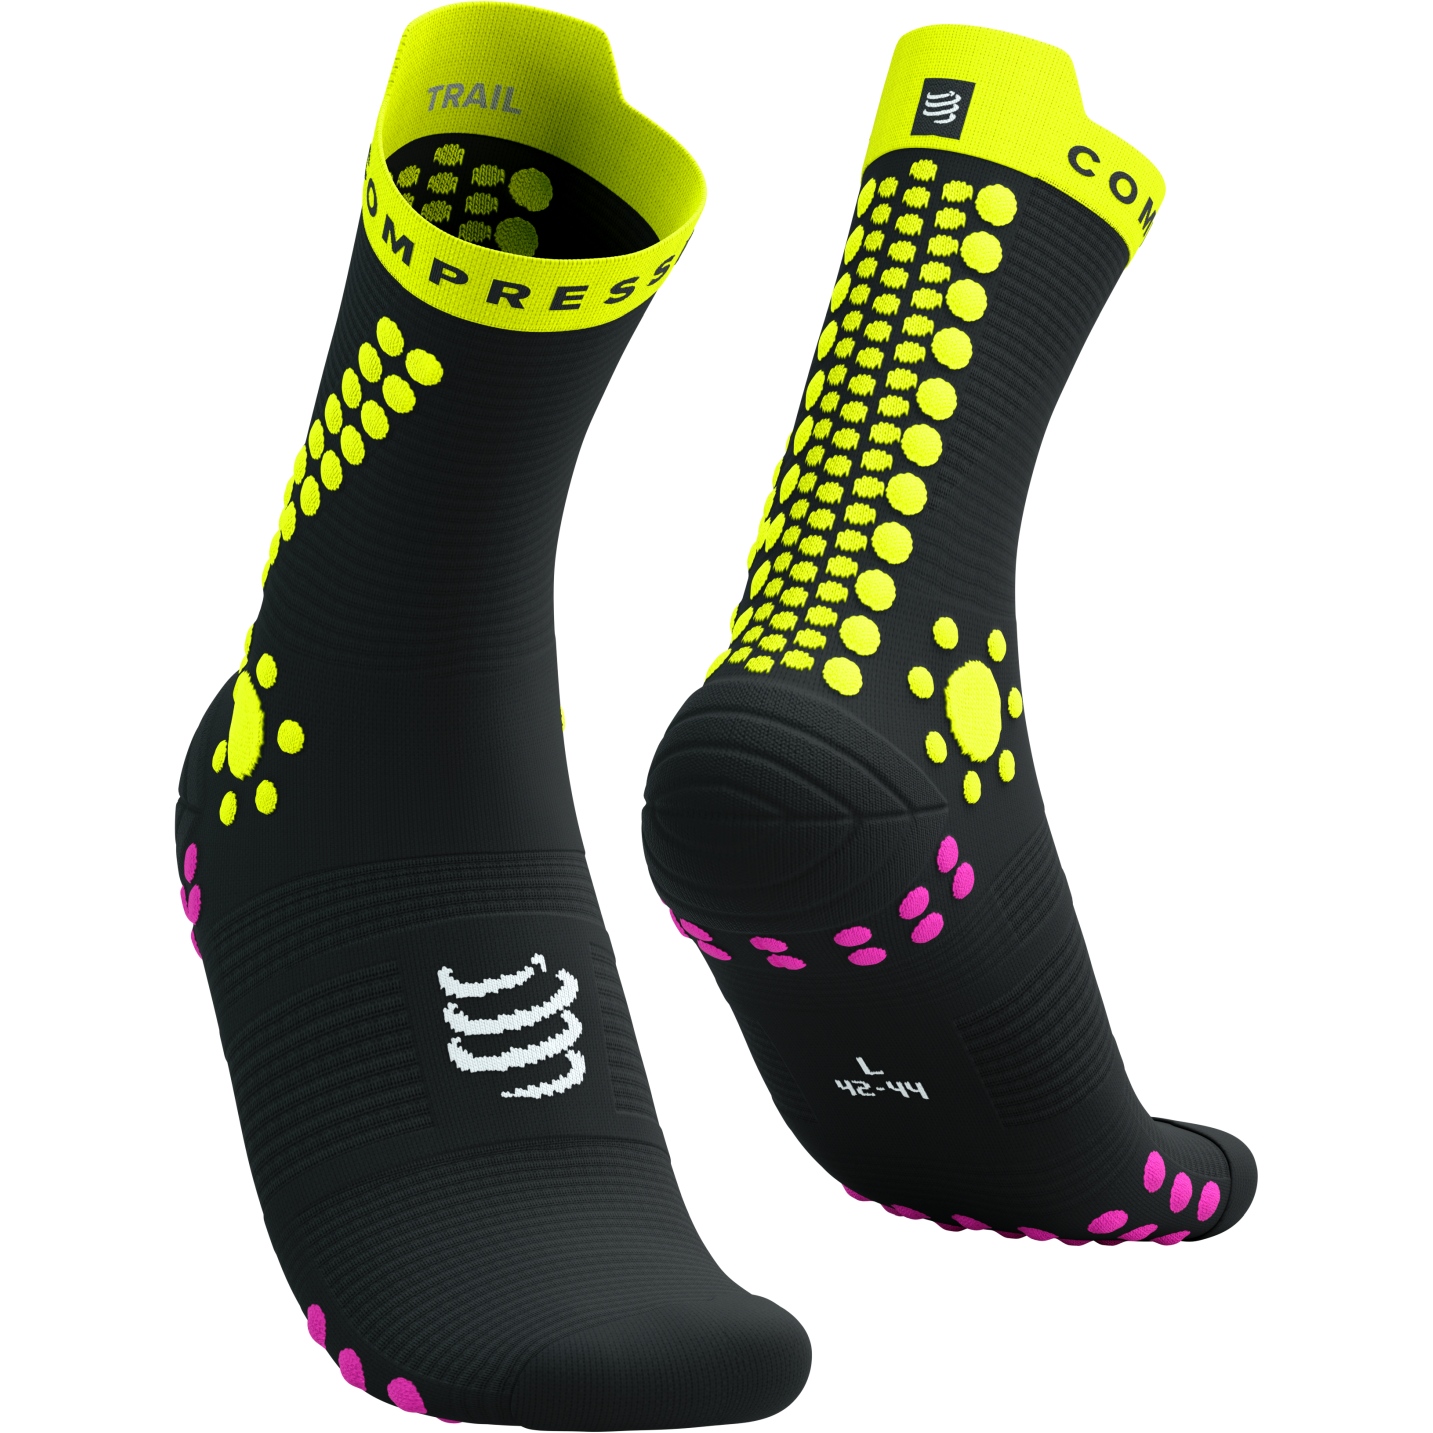 Picture of Compressport Pro Racing Compression Socks v4.0 Trail - black/safety yellow/neon pink